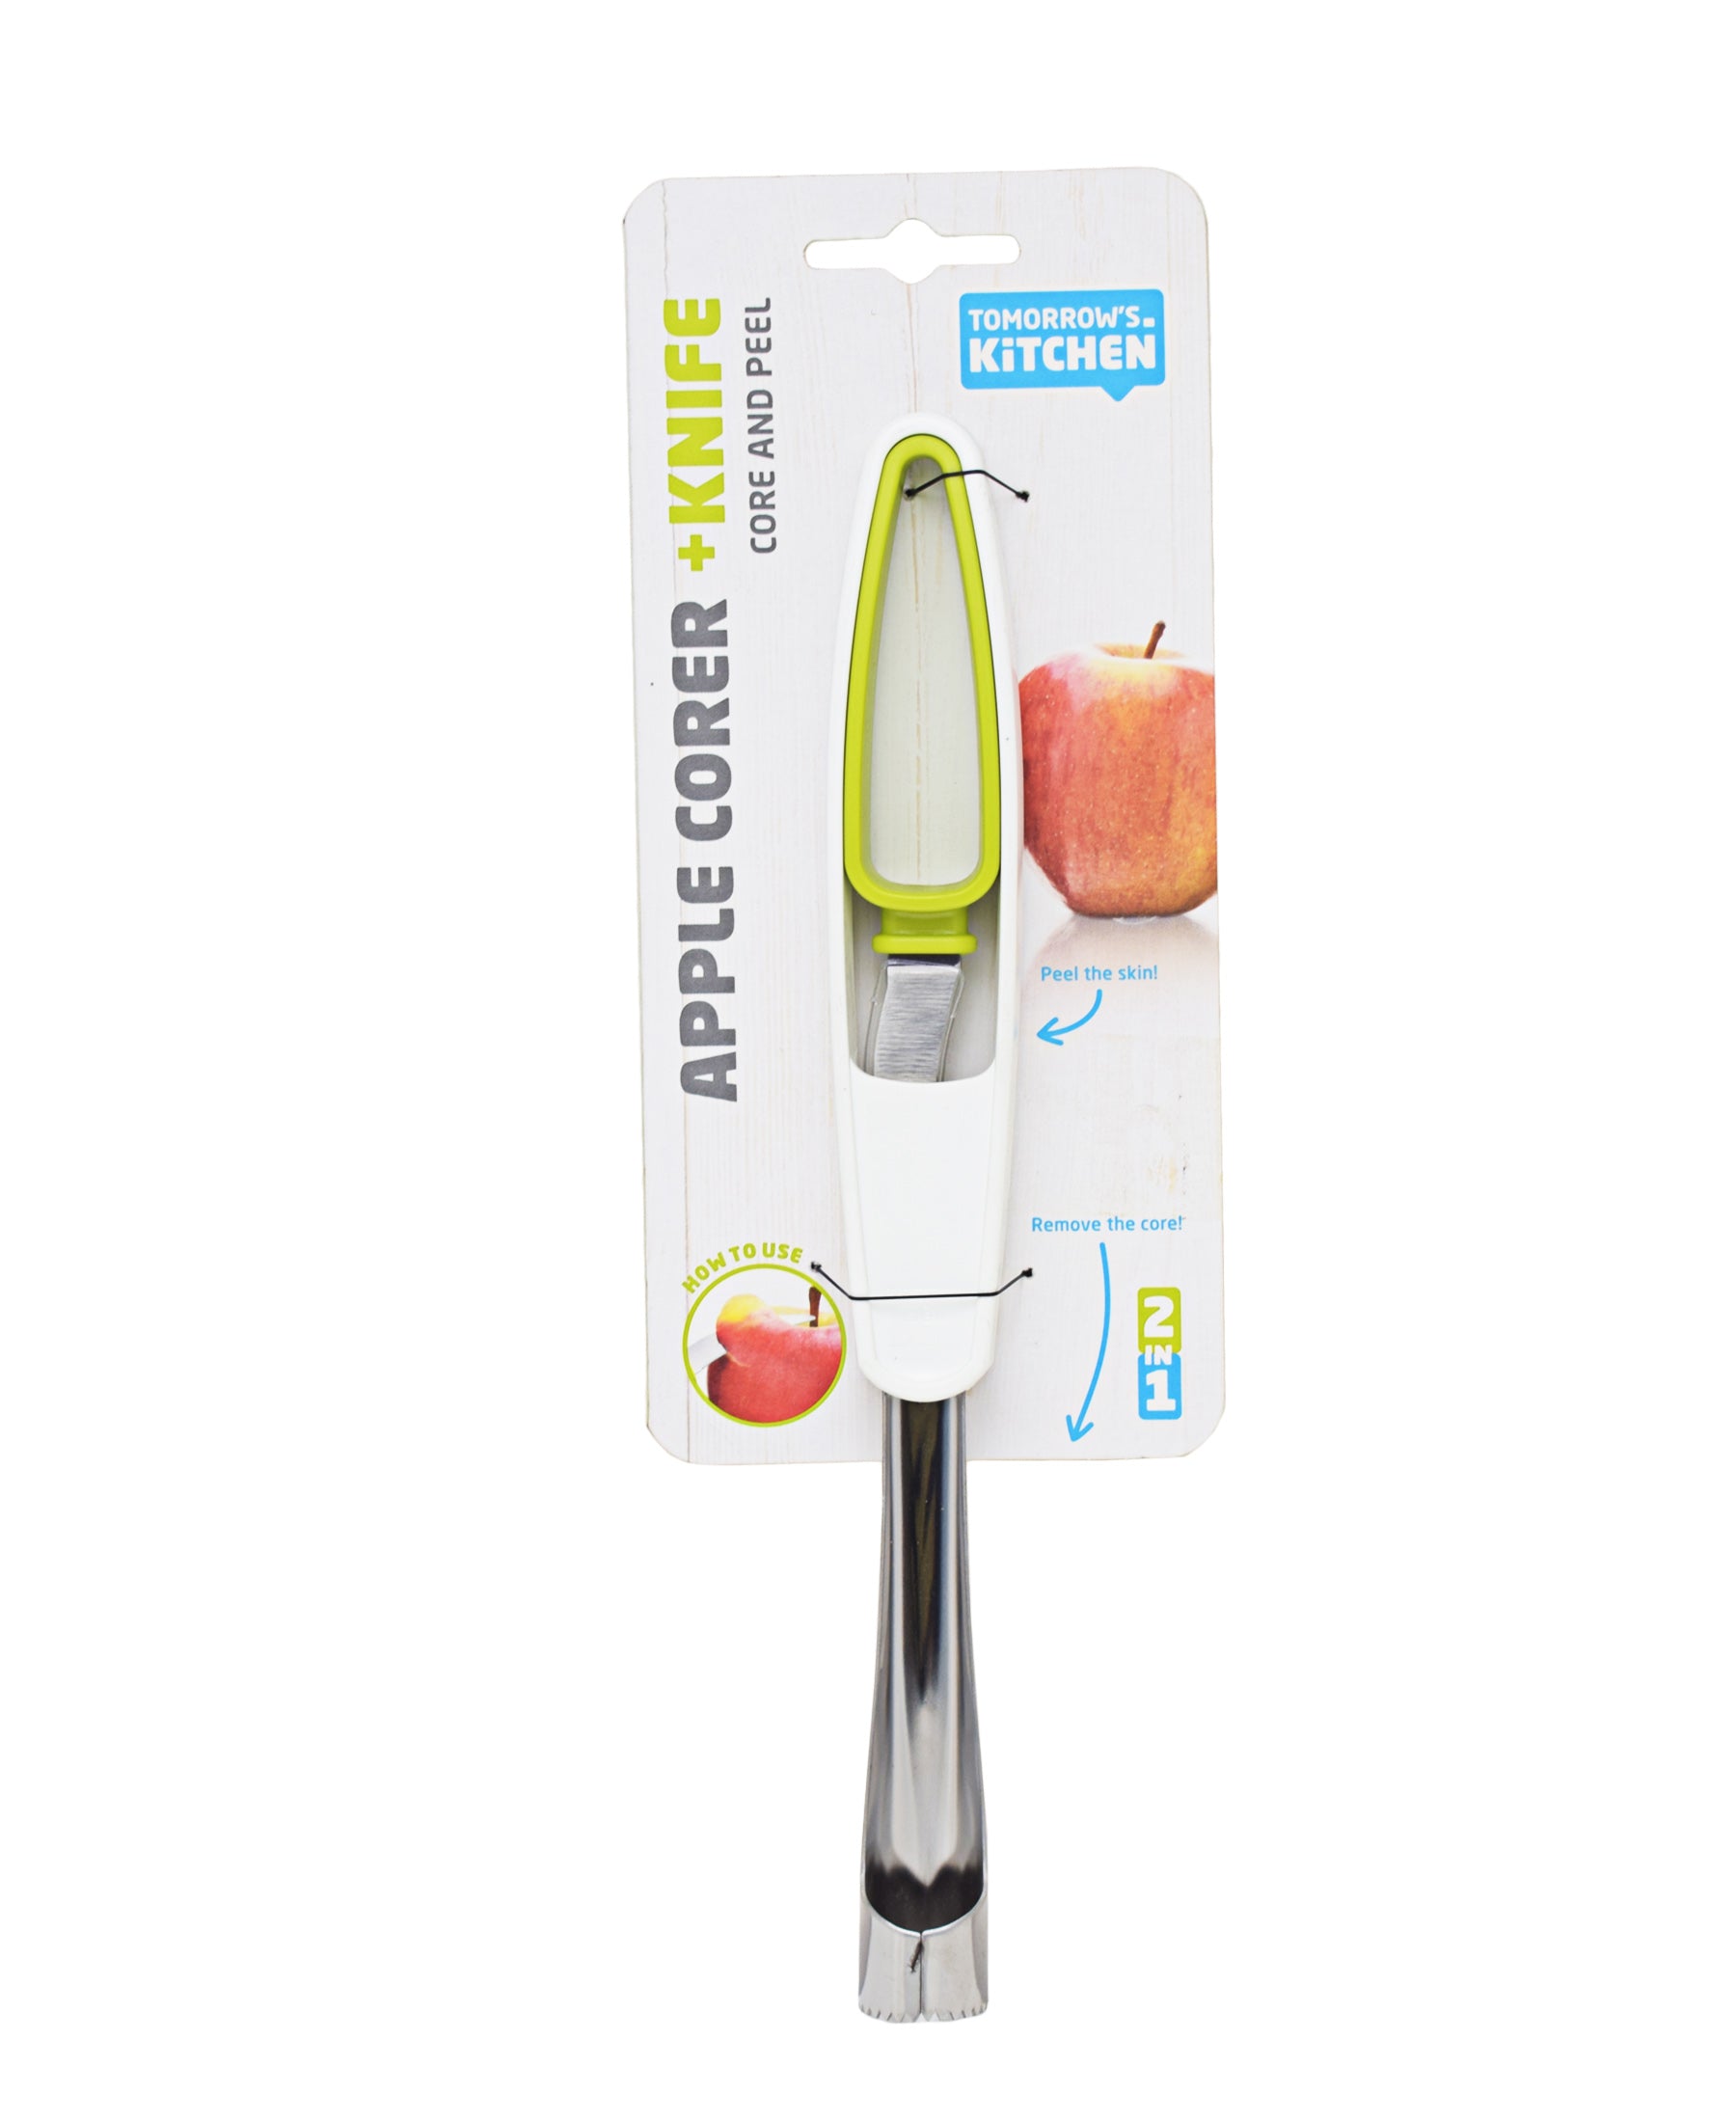 Tomorrows Kitchen Apple Corer and Knife core and peel